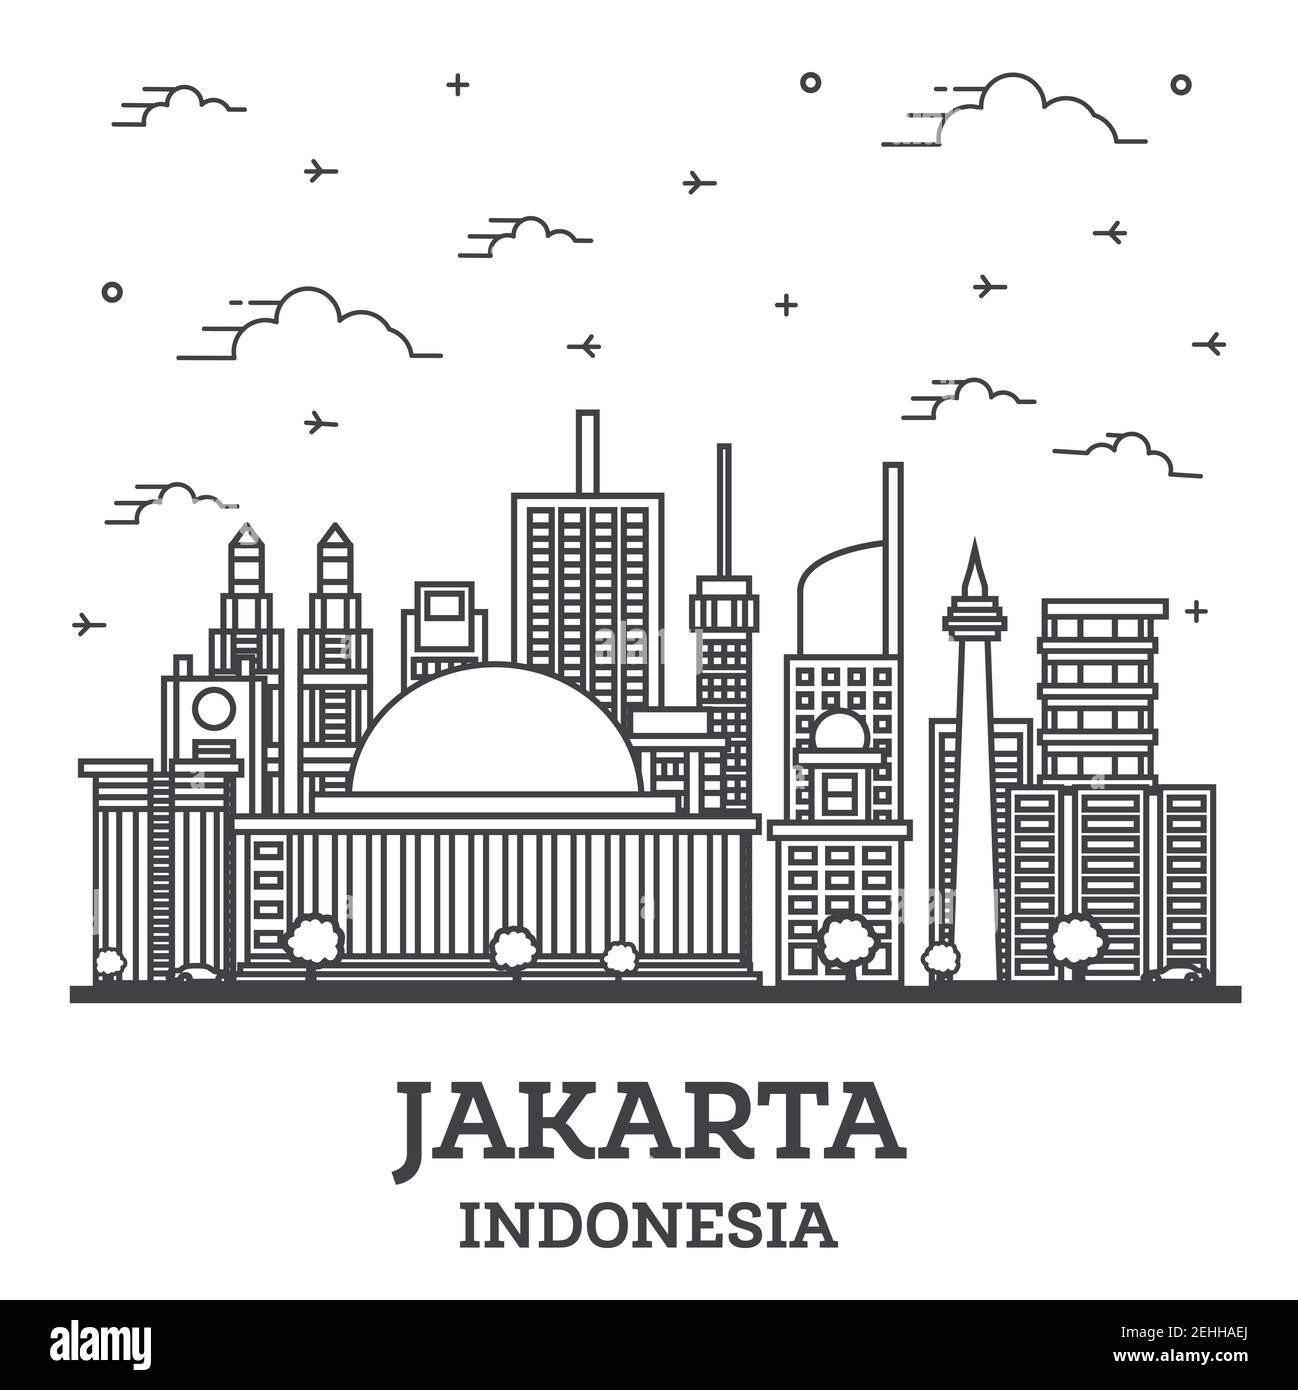 Outline Jakarta Indonesia City Skyline with Modern Buildings Isolated on White. Vector Illustration. Jakarta Cityscape with Landmarks. Stock Vector